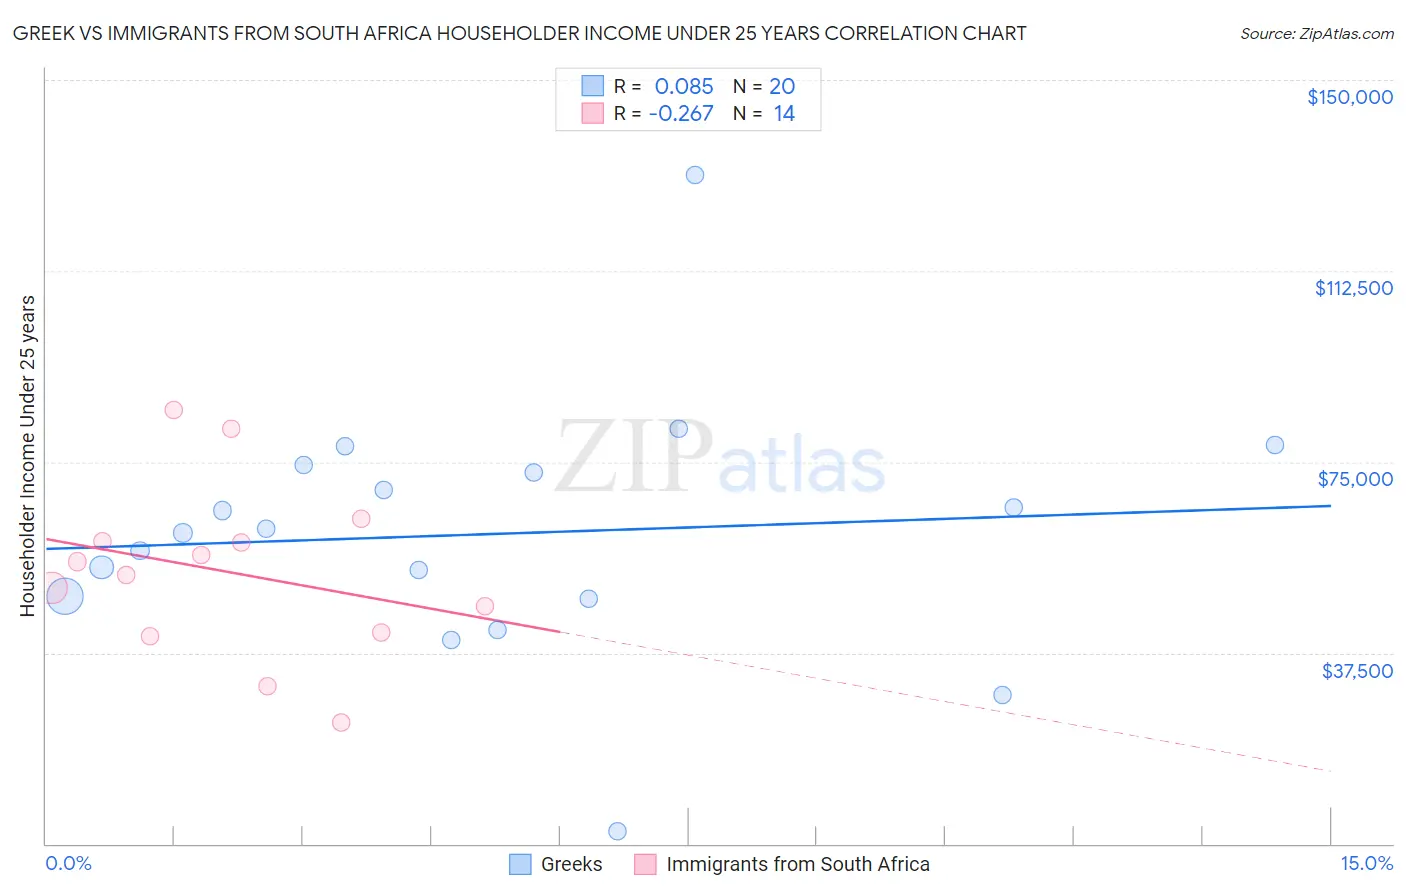 Greek vs Immigrants from South Africa Householder Income Under 25 years